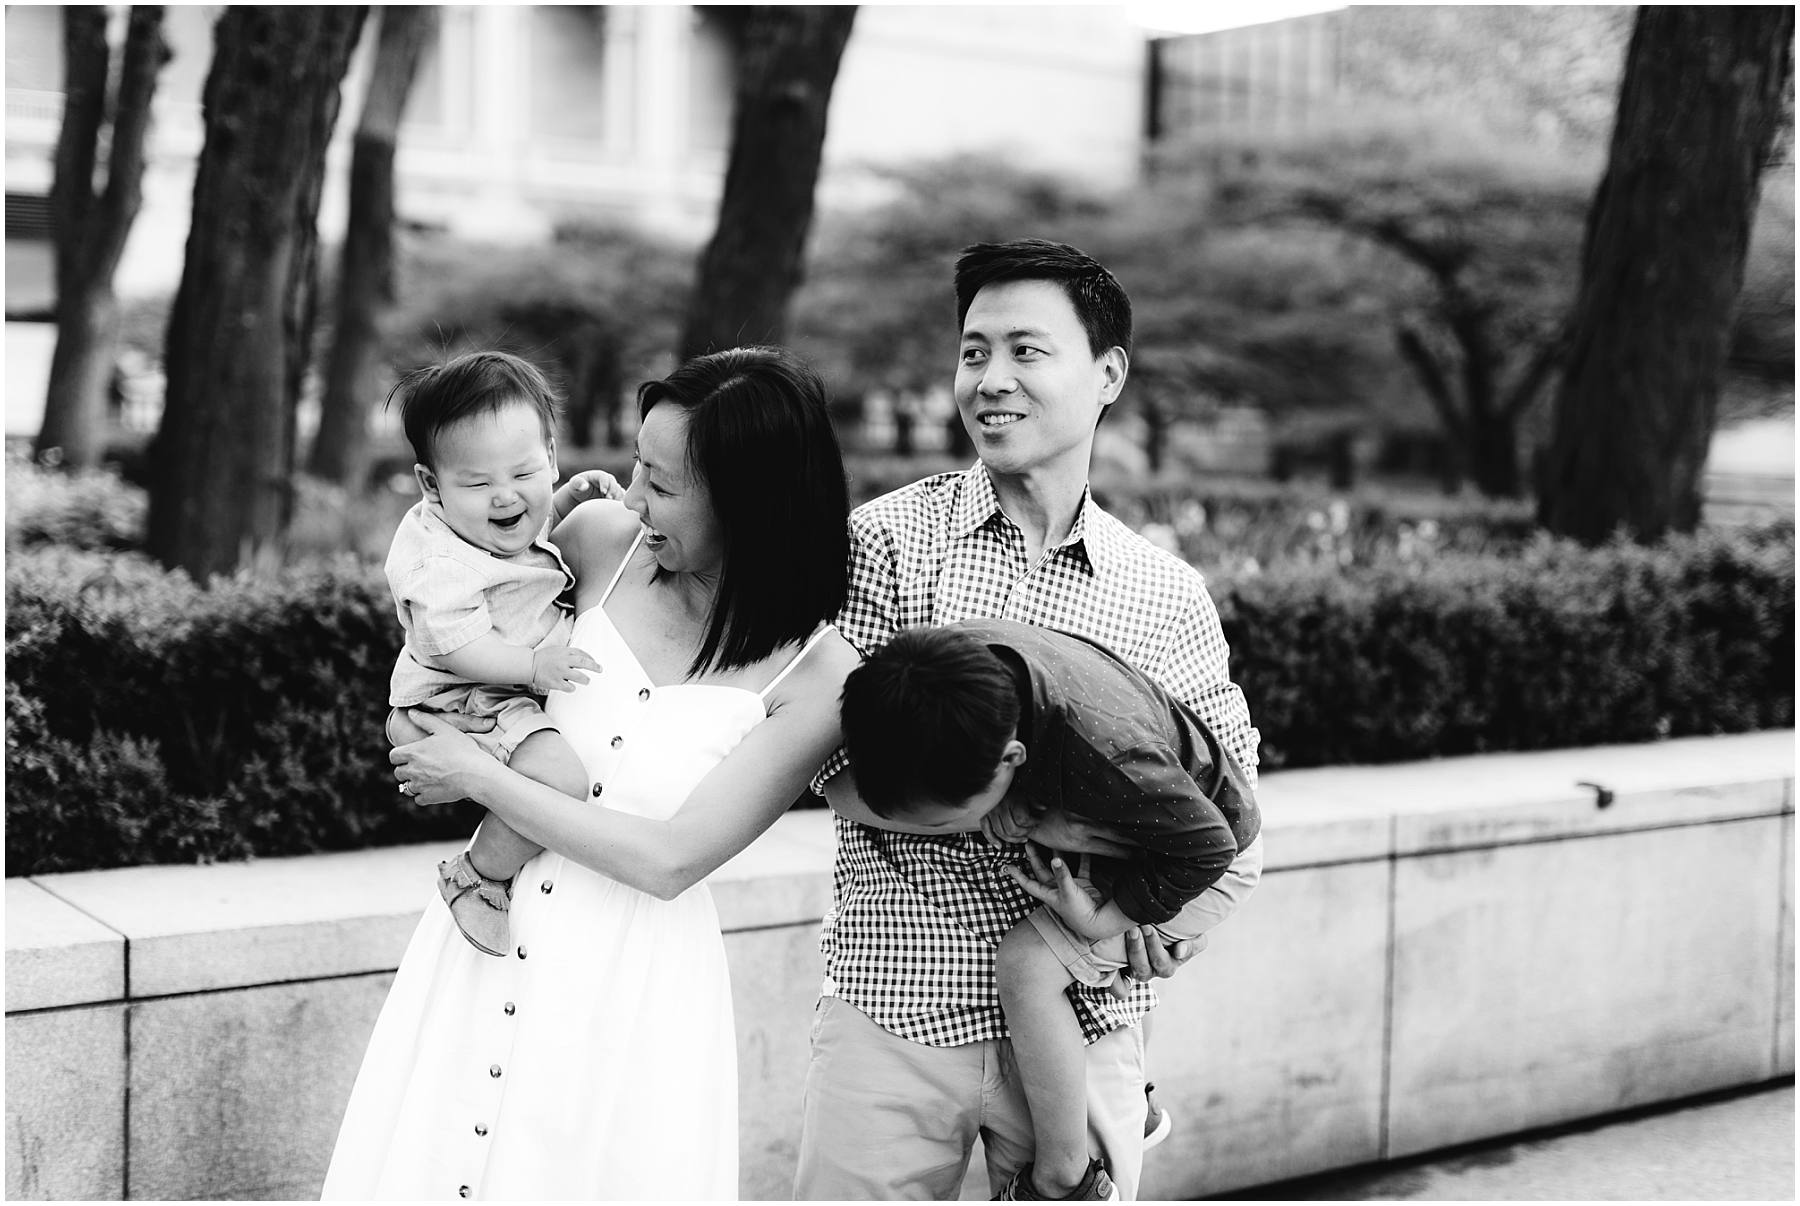 Chicago Lifestyle Family Photographer at Lurie Garden and Art Institute